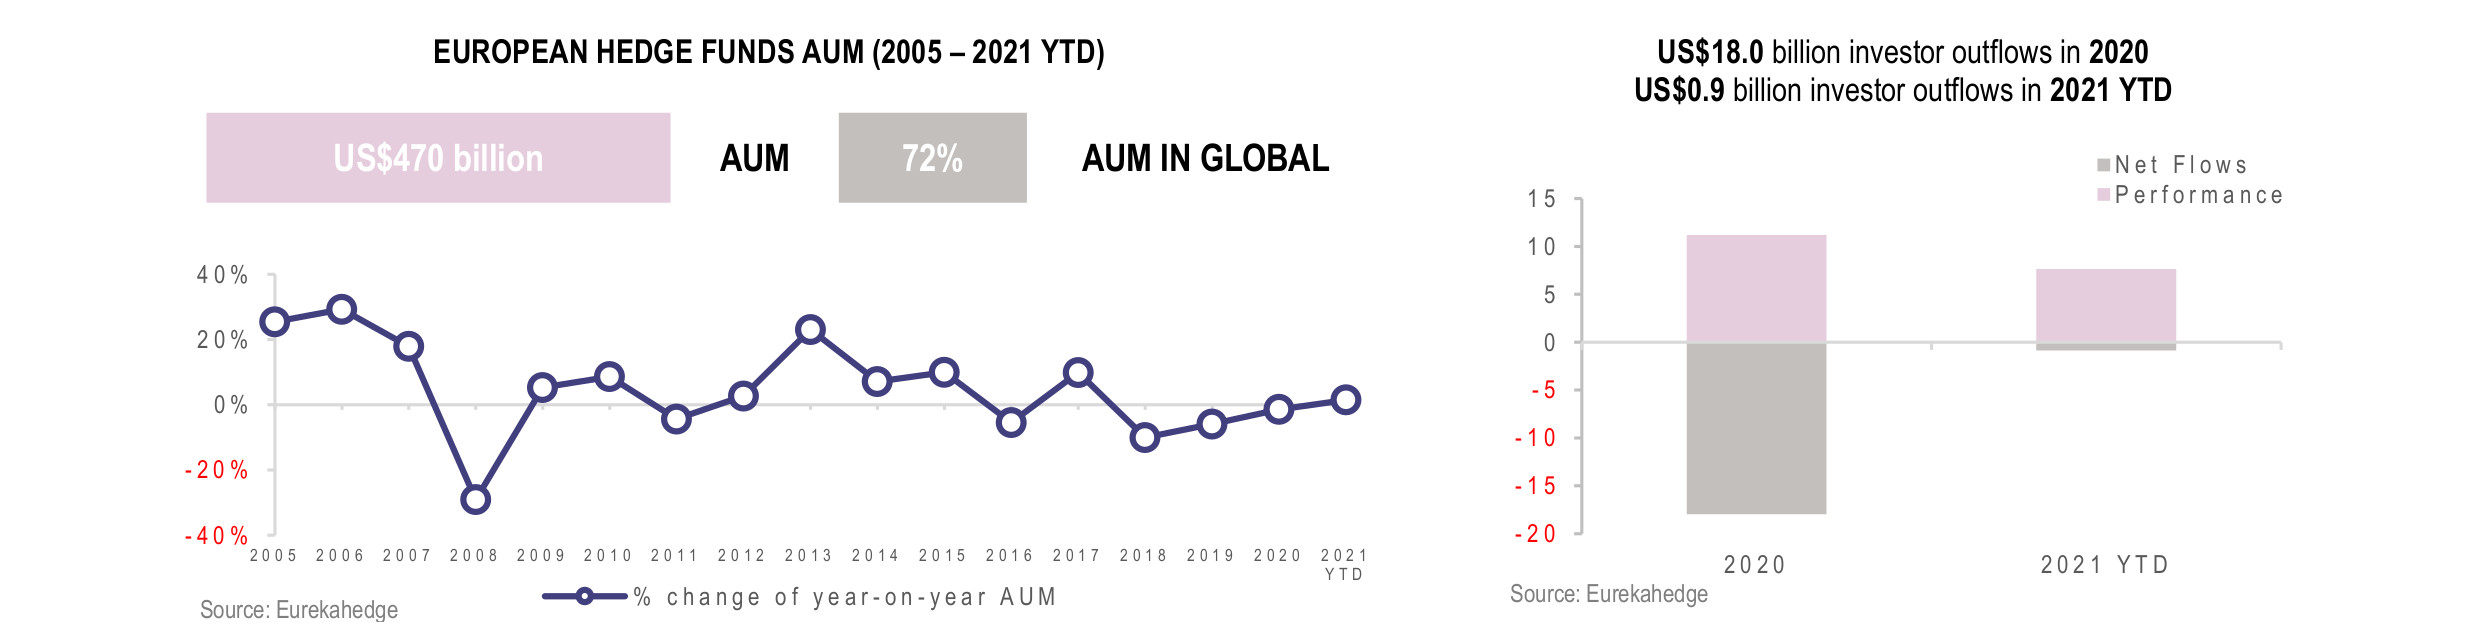 European Hedge Funds Infographic May 2021 - AUM